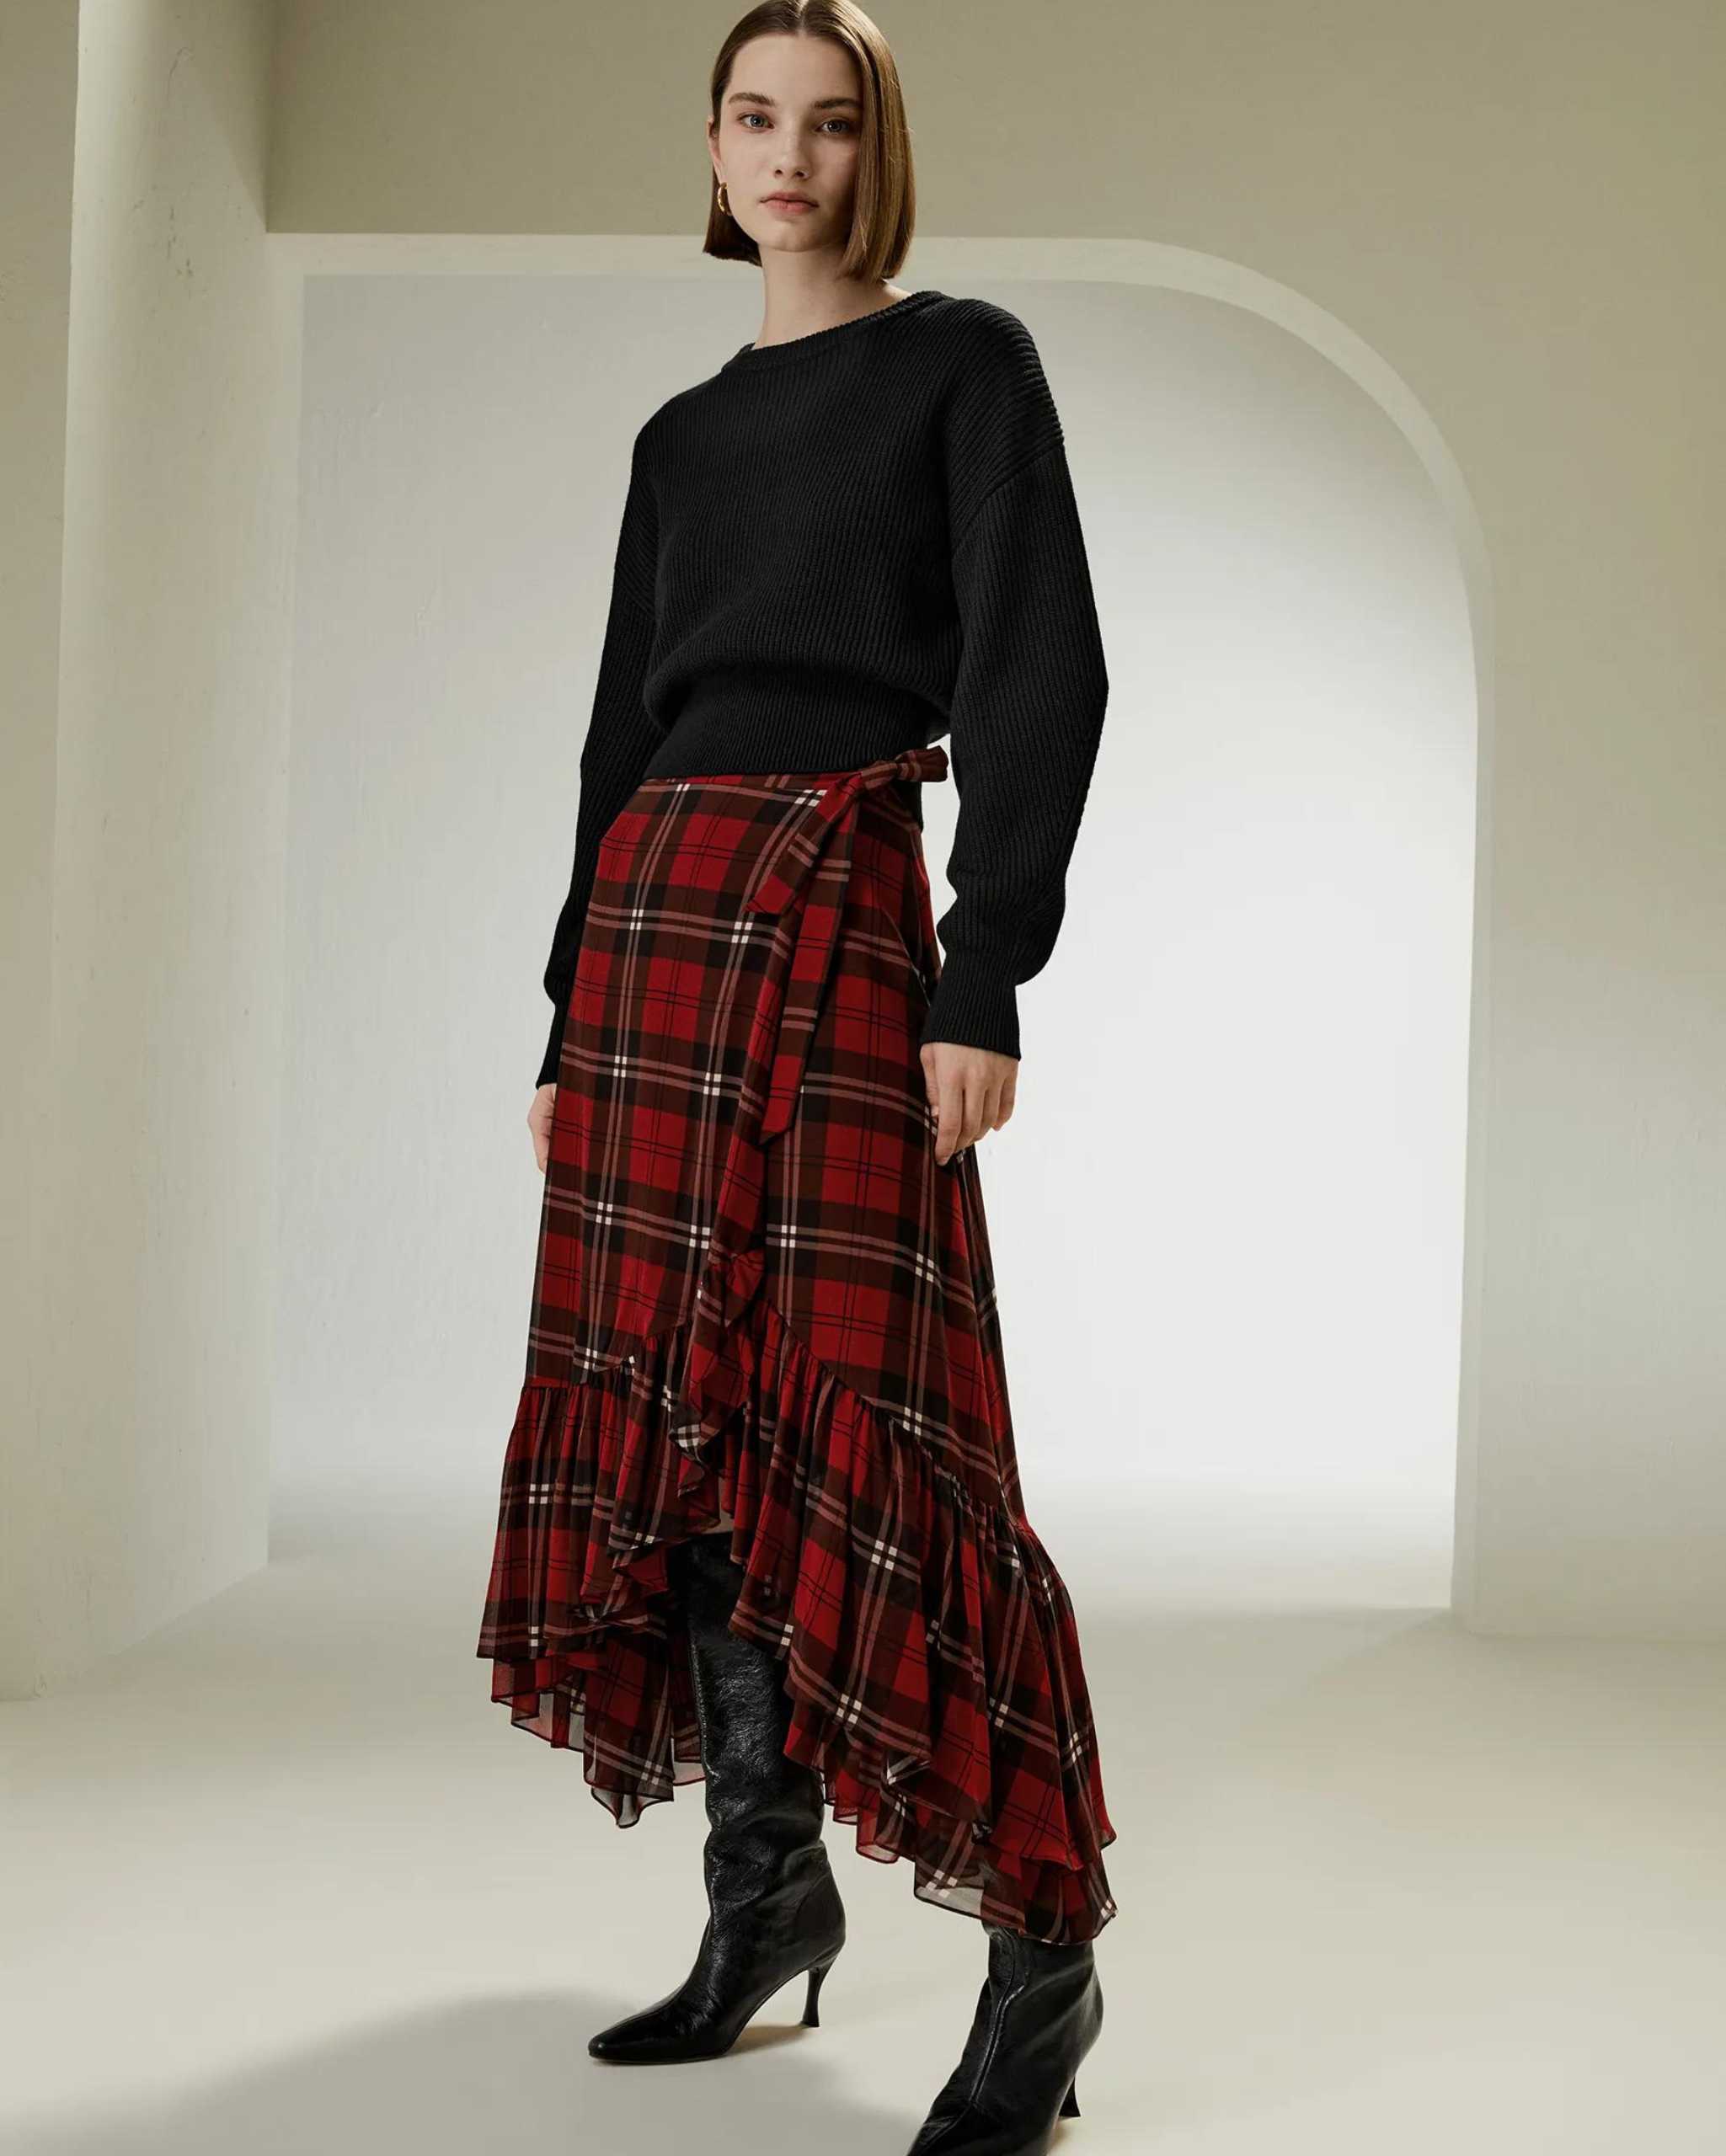 Casual Christmas Outfit with Plaid Skirt